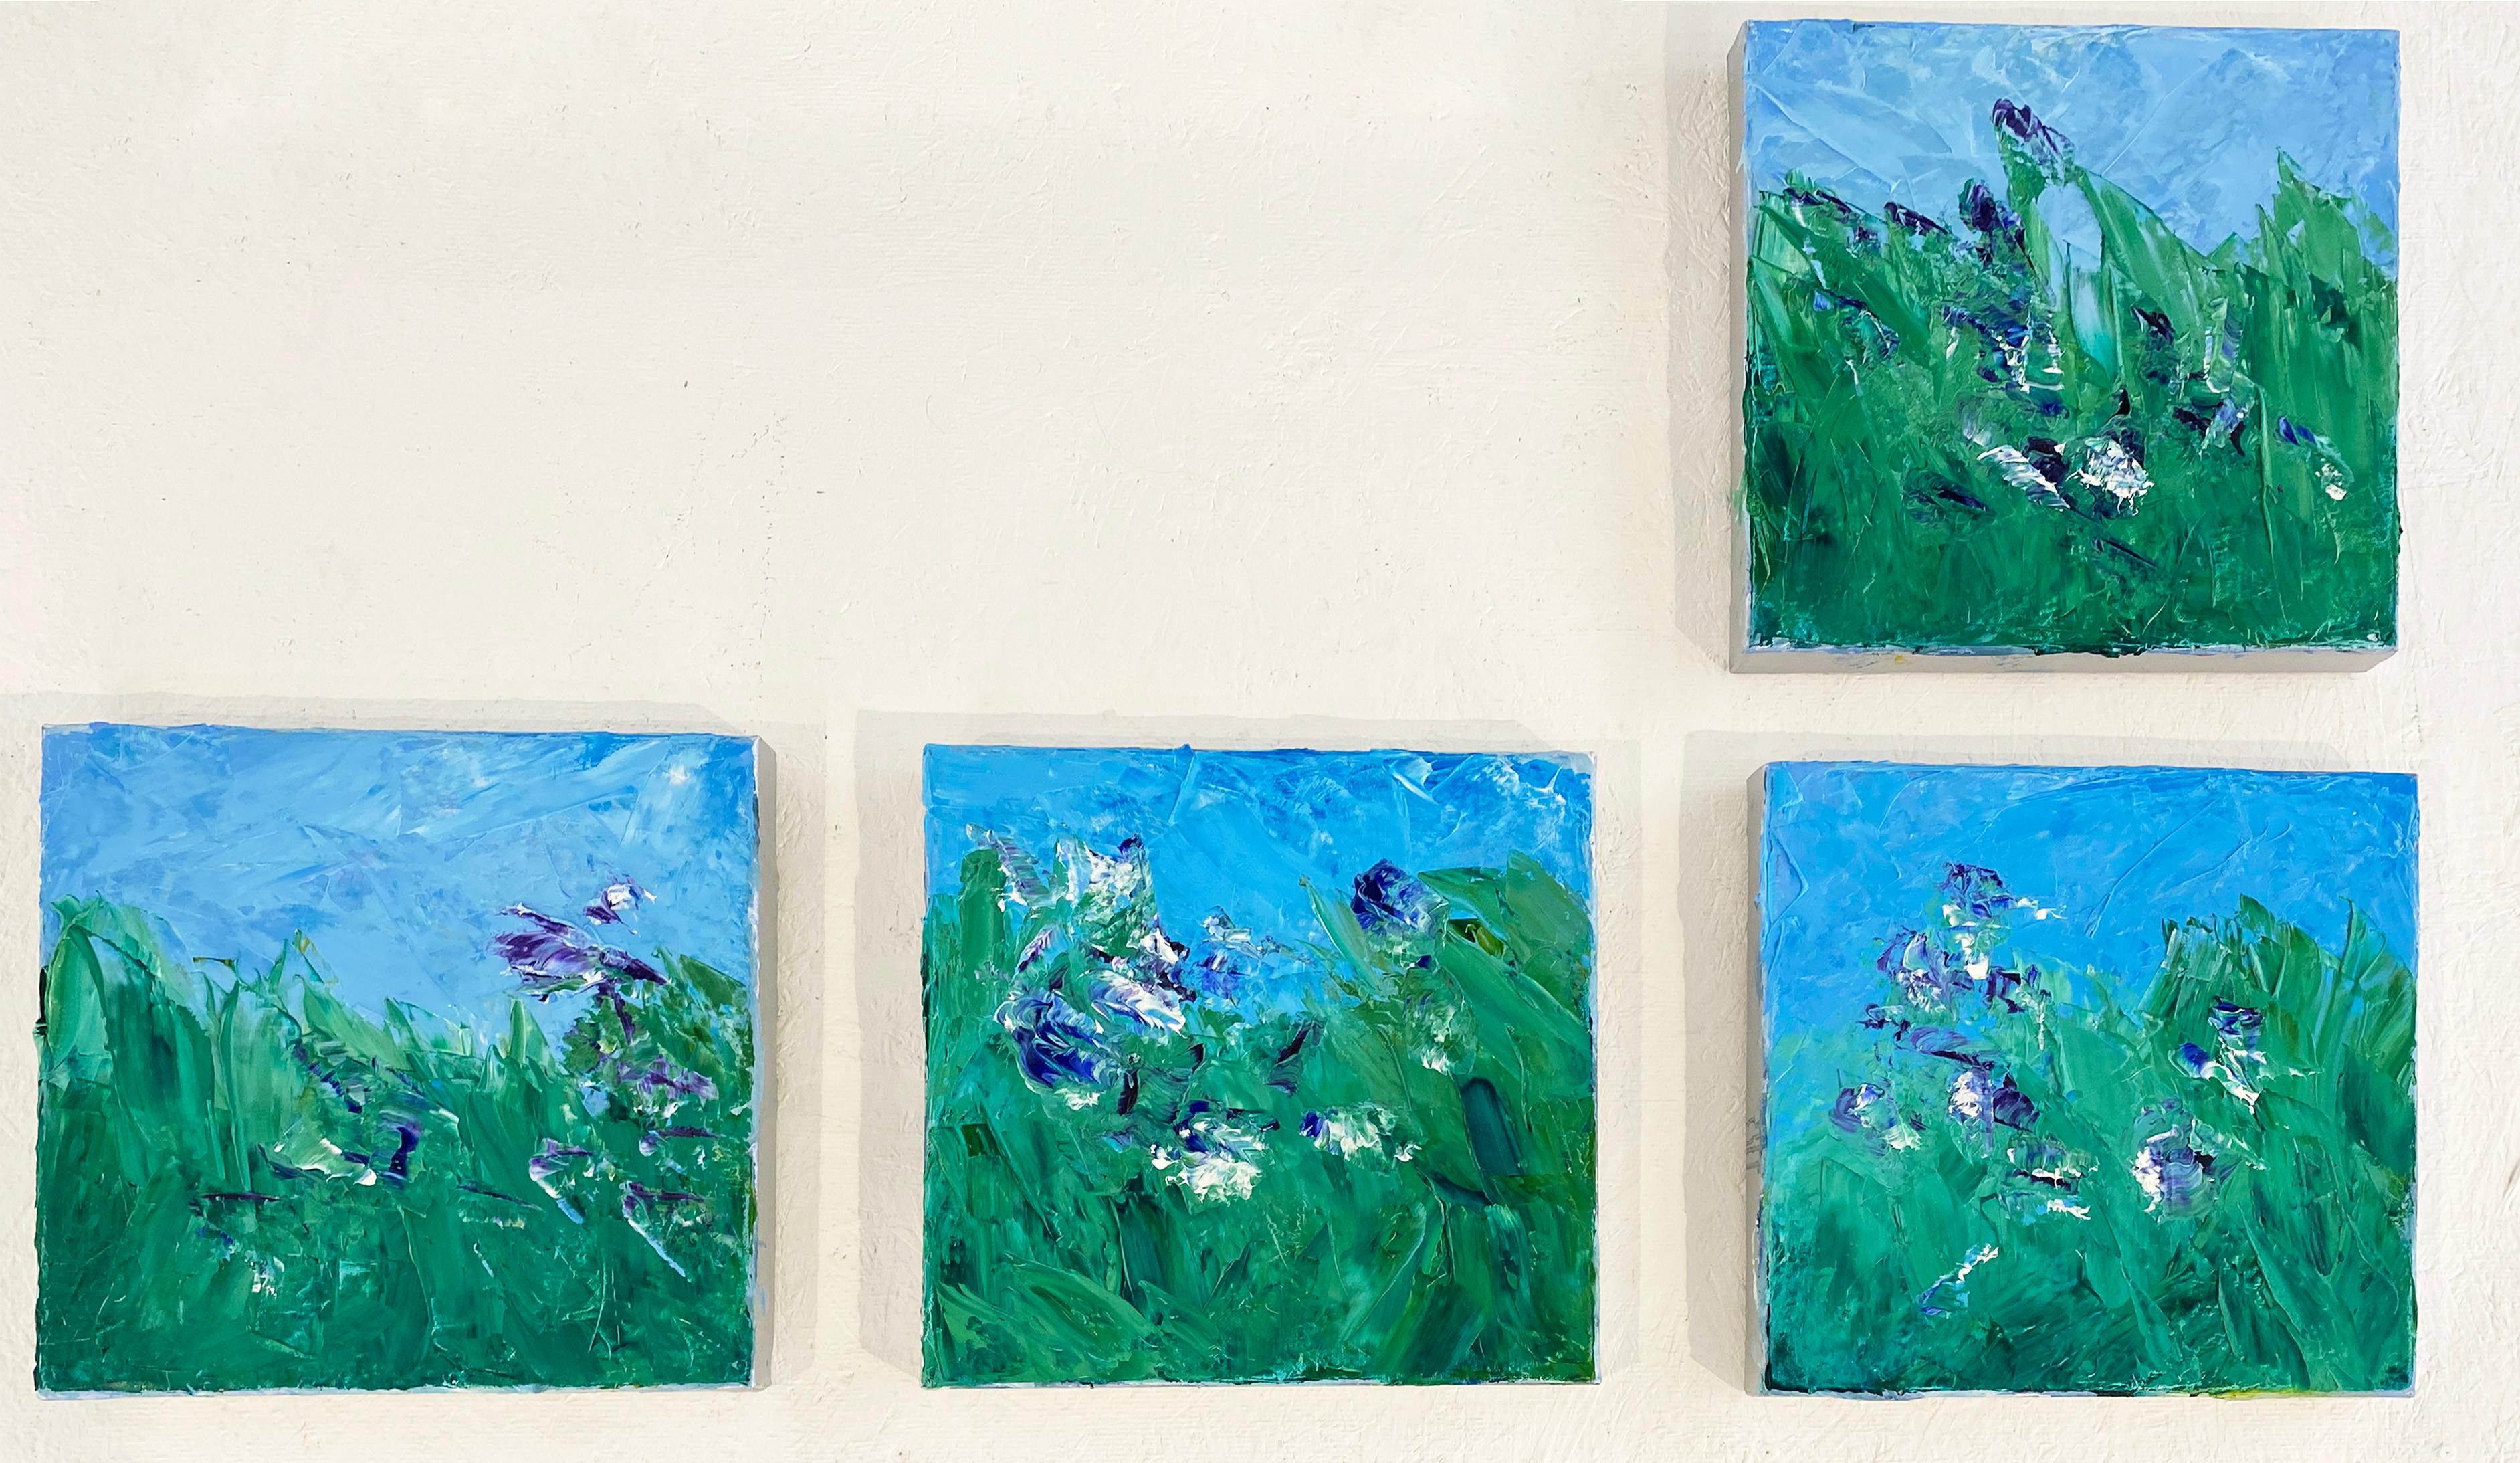 This small oil painting on canvas is a highly-textured abstract floral painting. Abstracted green grass is speckled with strokes of purple and white flowers, with a pale blue sky above. The artist uses a palette knife to layer on oil paint, which